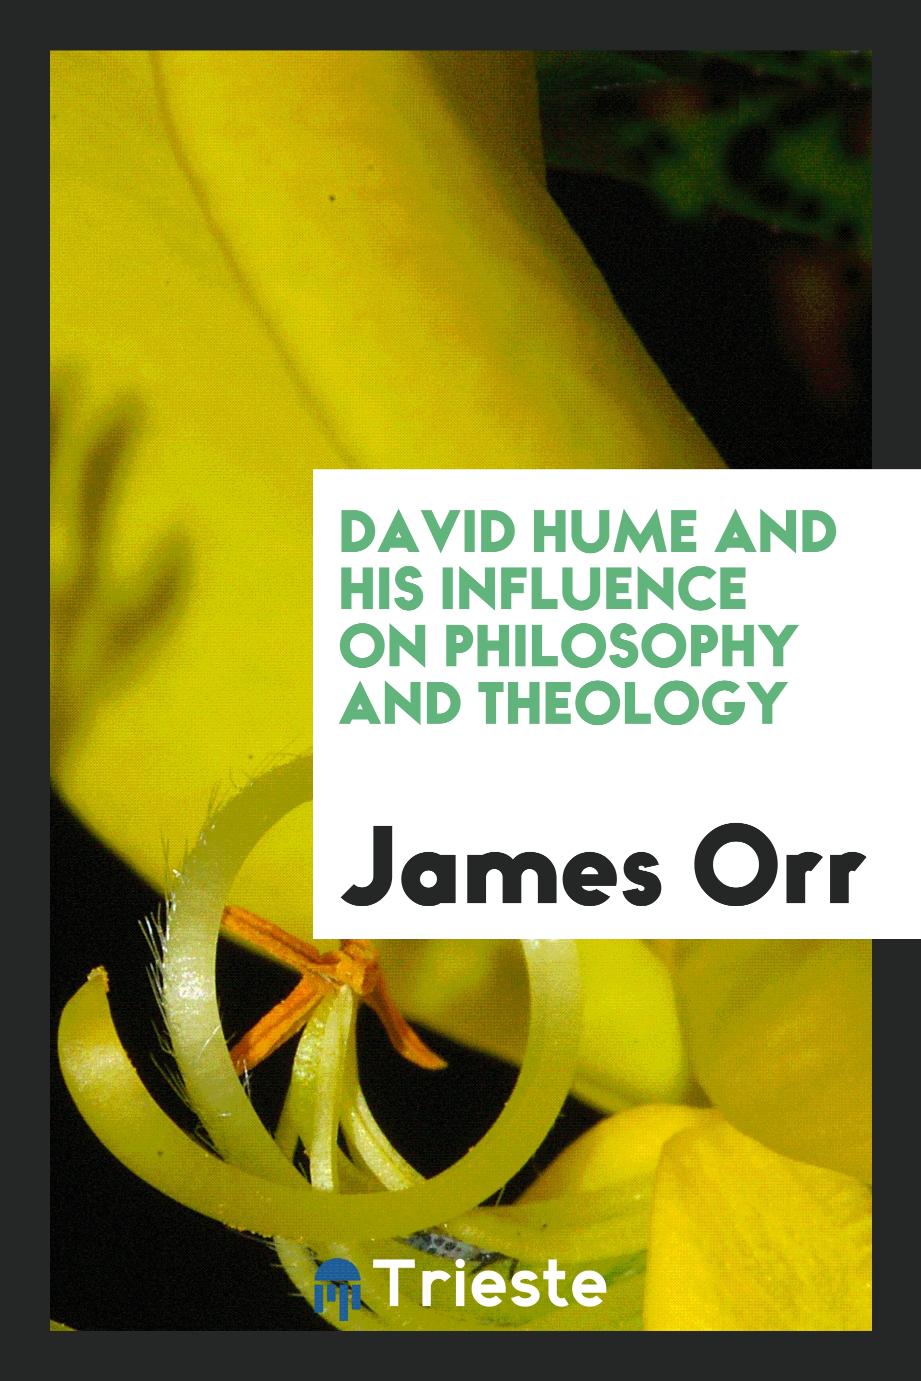 David Hume and his influence on philosophy and theology